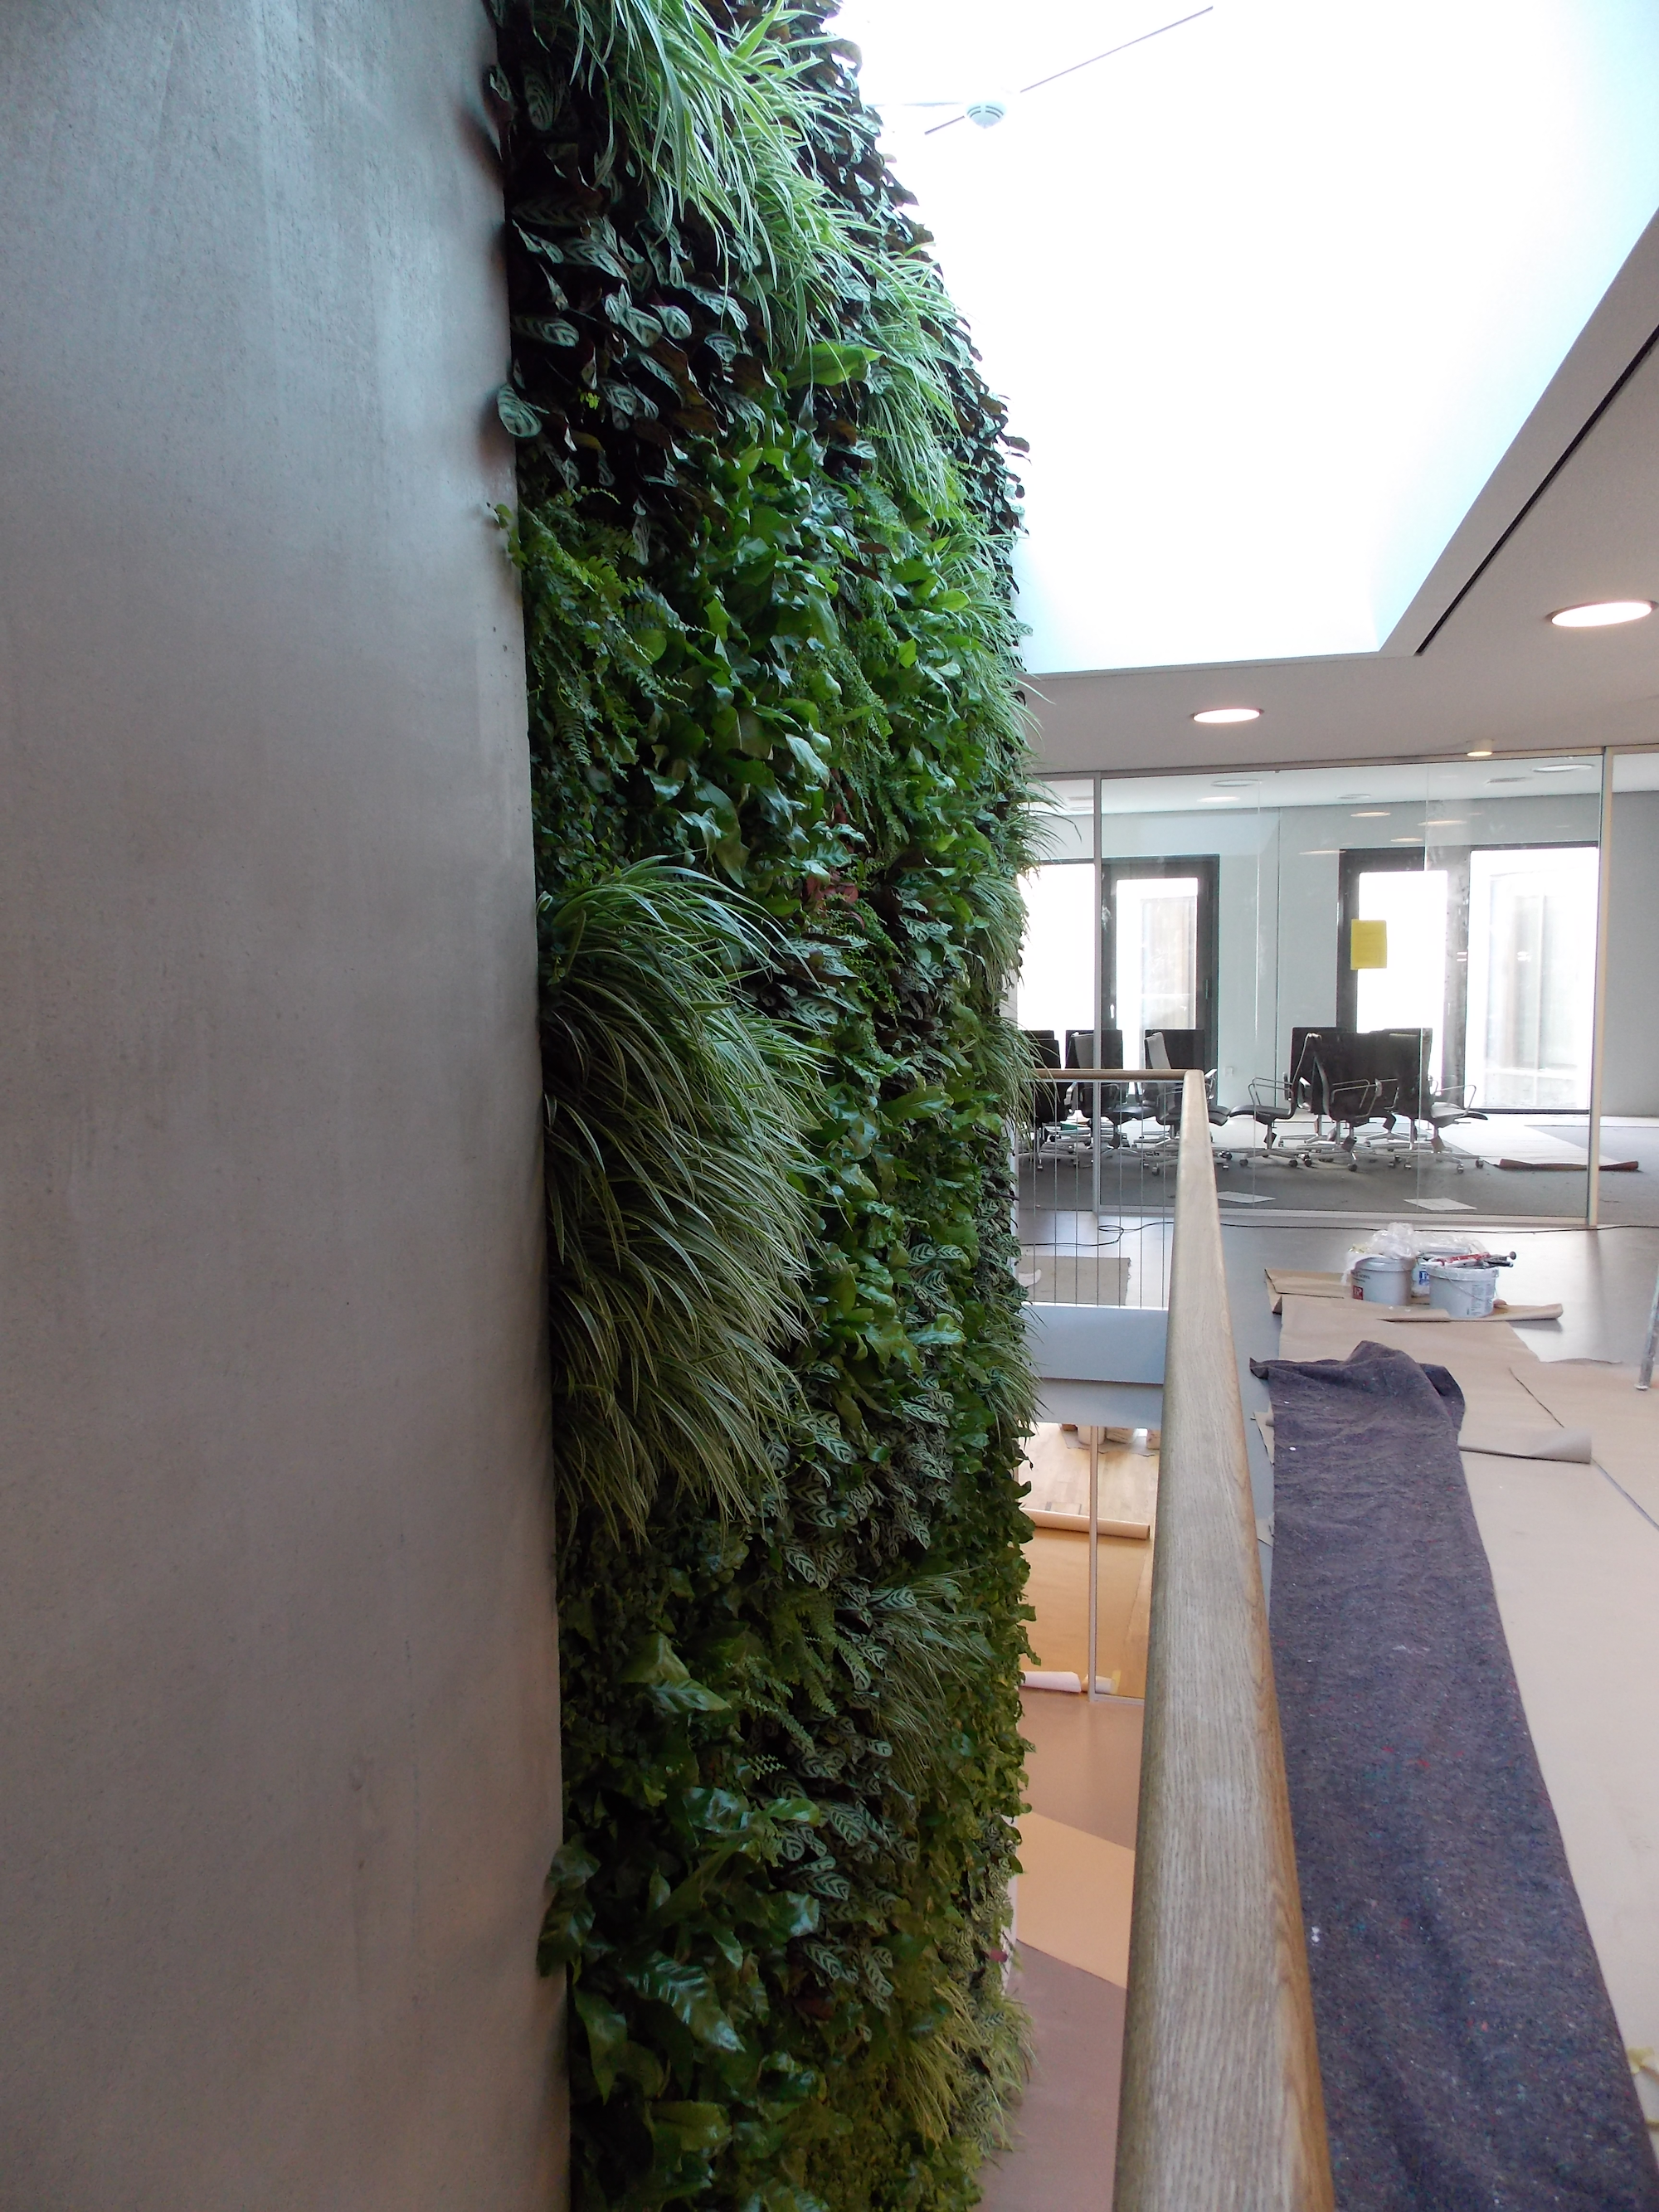 side view of lush interior plant living wall